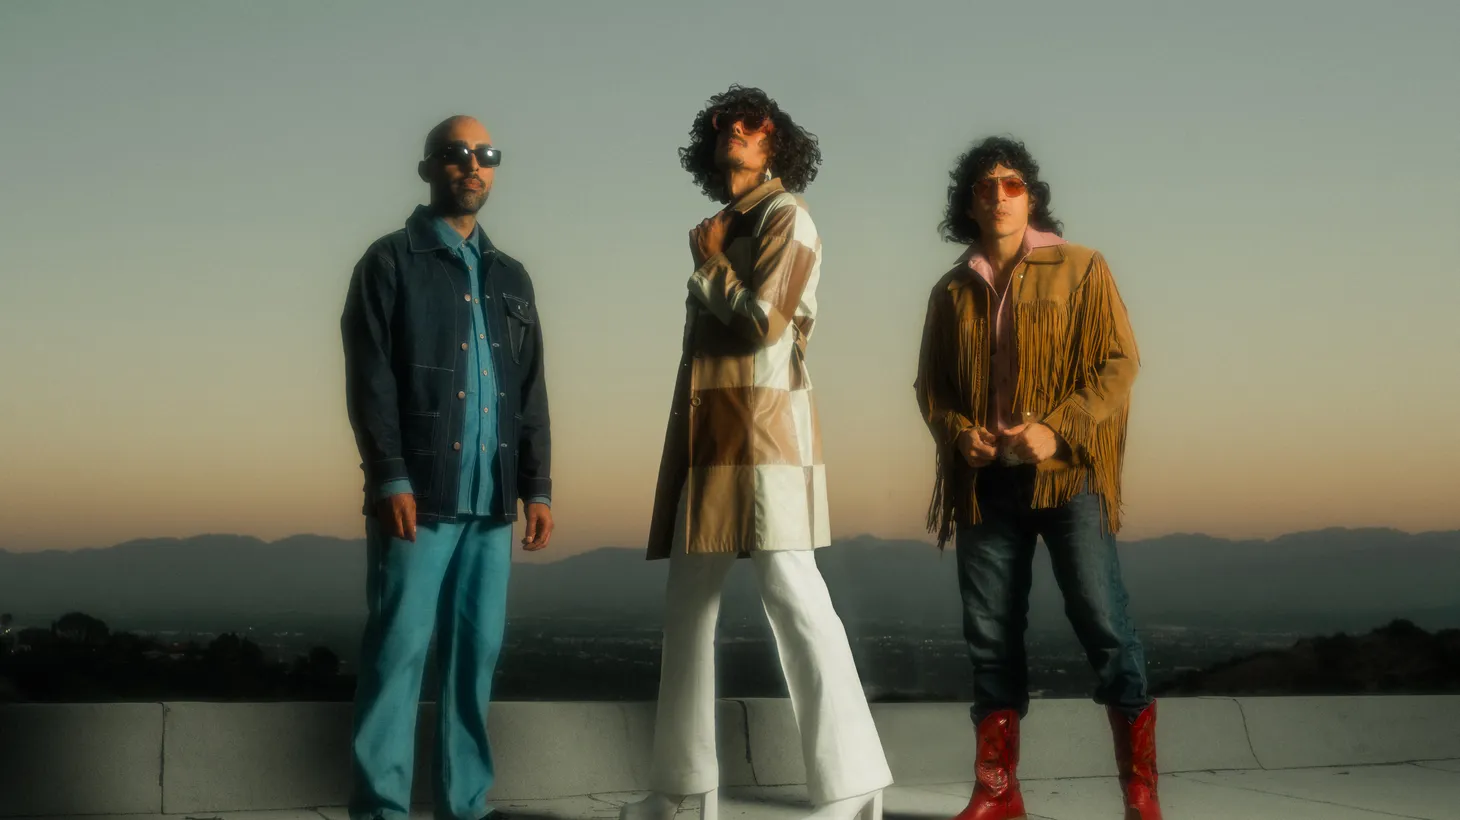 Are you ready for new Chicano Batman ? Today, we are honored to host the world premiere of “Fly” from the band’s much-anticipated new album, Notebook Fantasy, out late March.